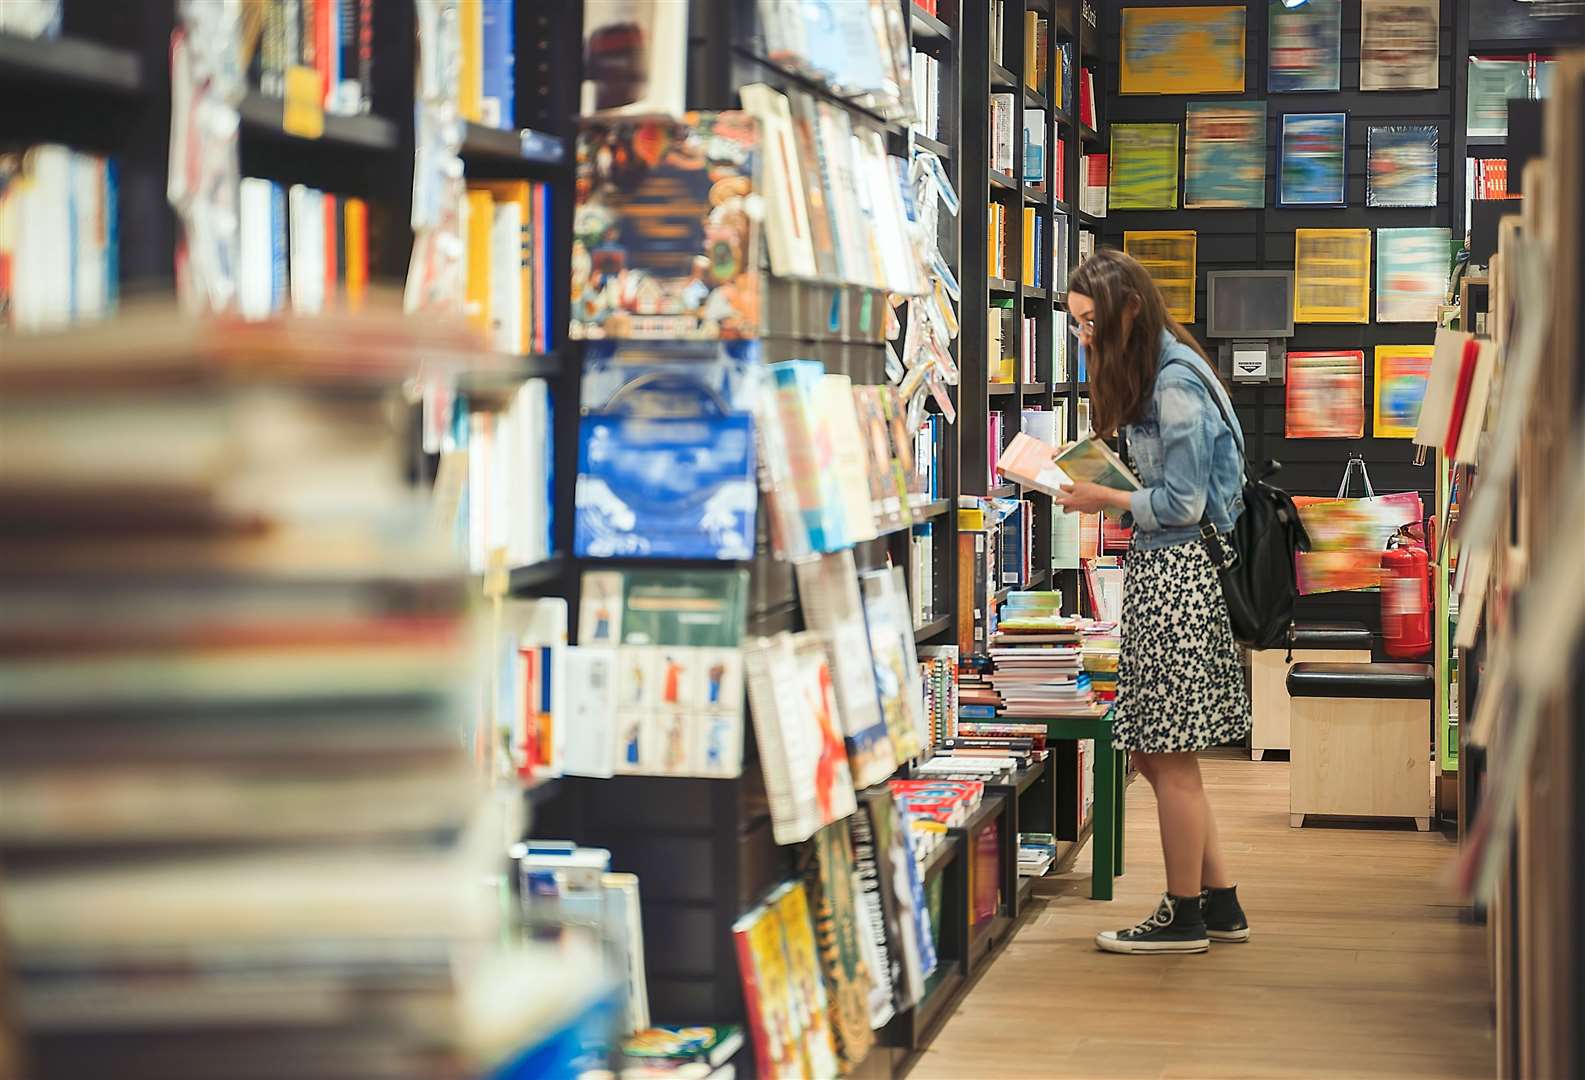 Bookshops limp on – but they are now few and far between